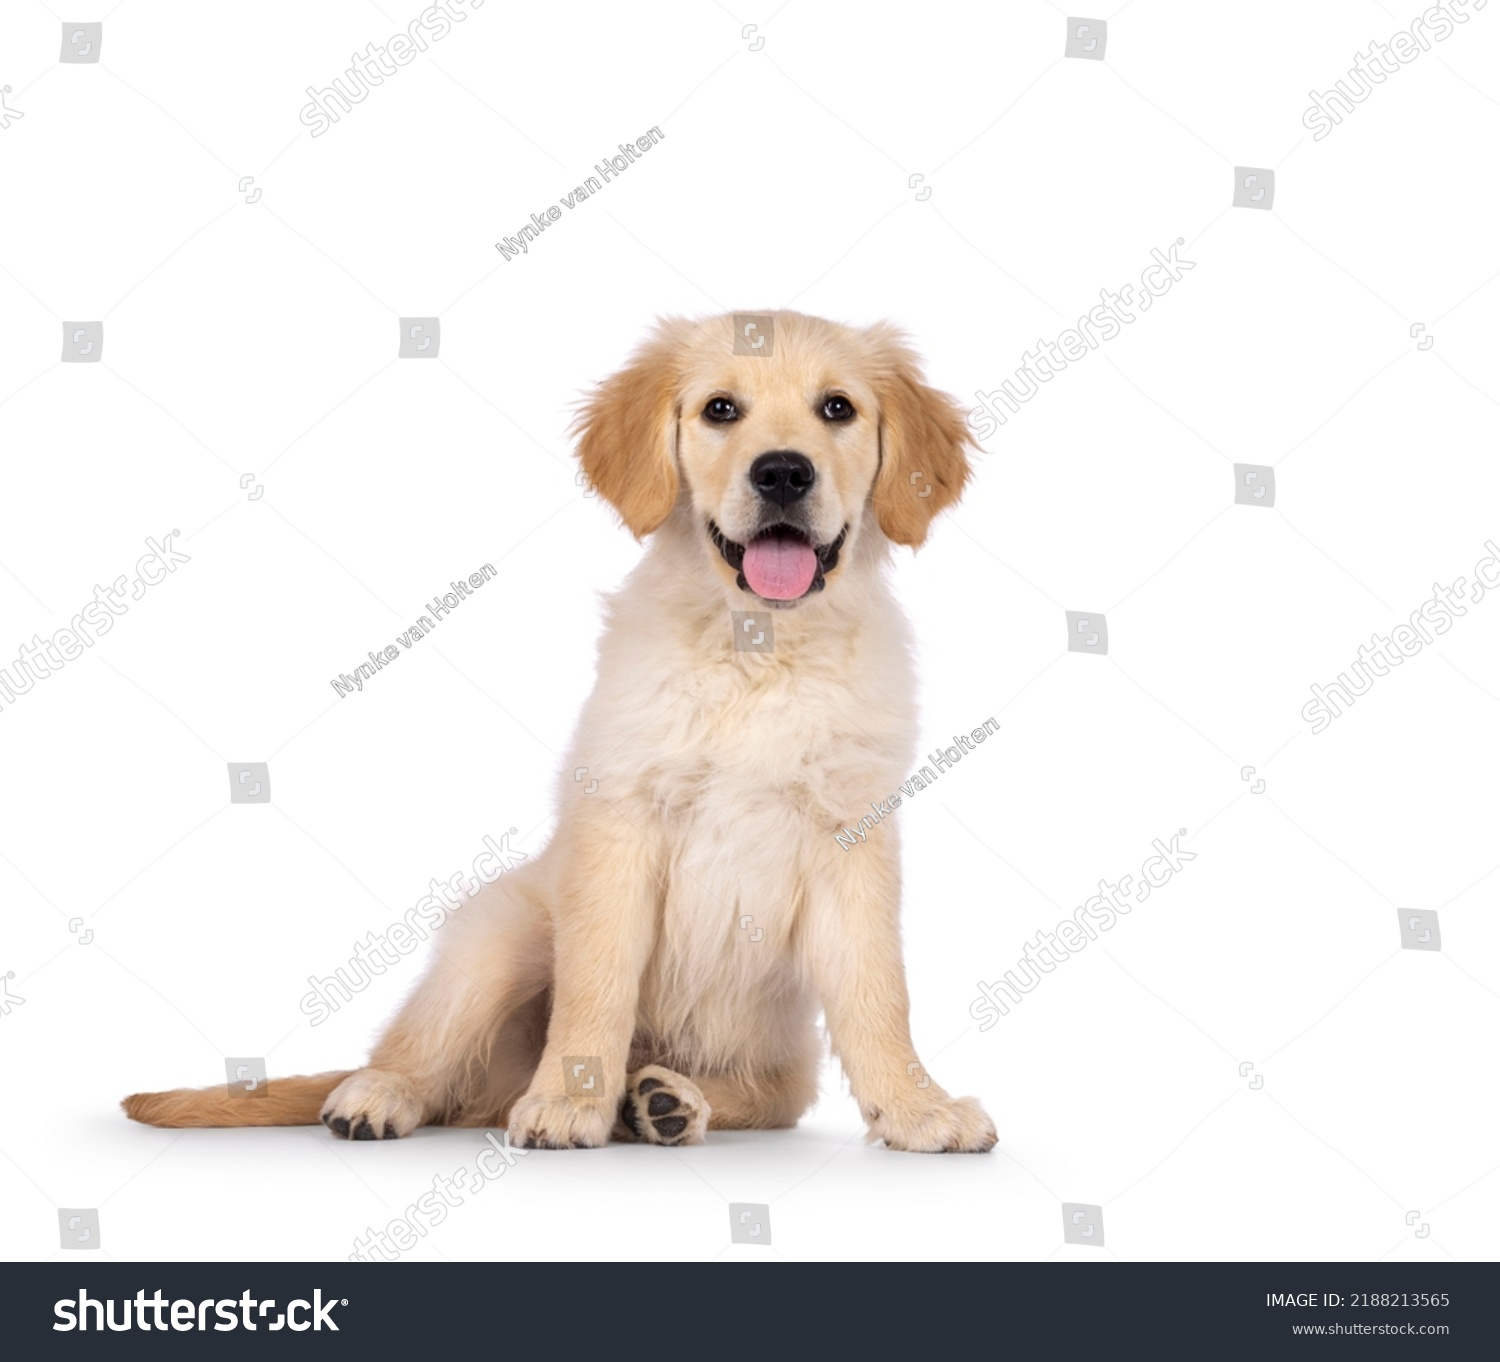 Adorable 3 months old Golden retriever pup, sitting facing front. Looking towards camera with dark brown eyes. Isolated on a white background. Mouth open, tongue out. #2188213565